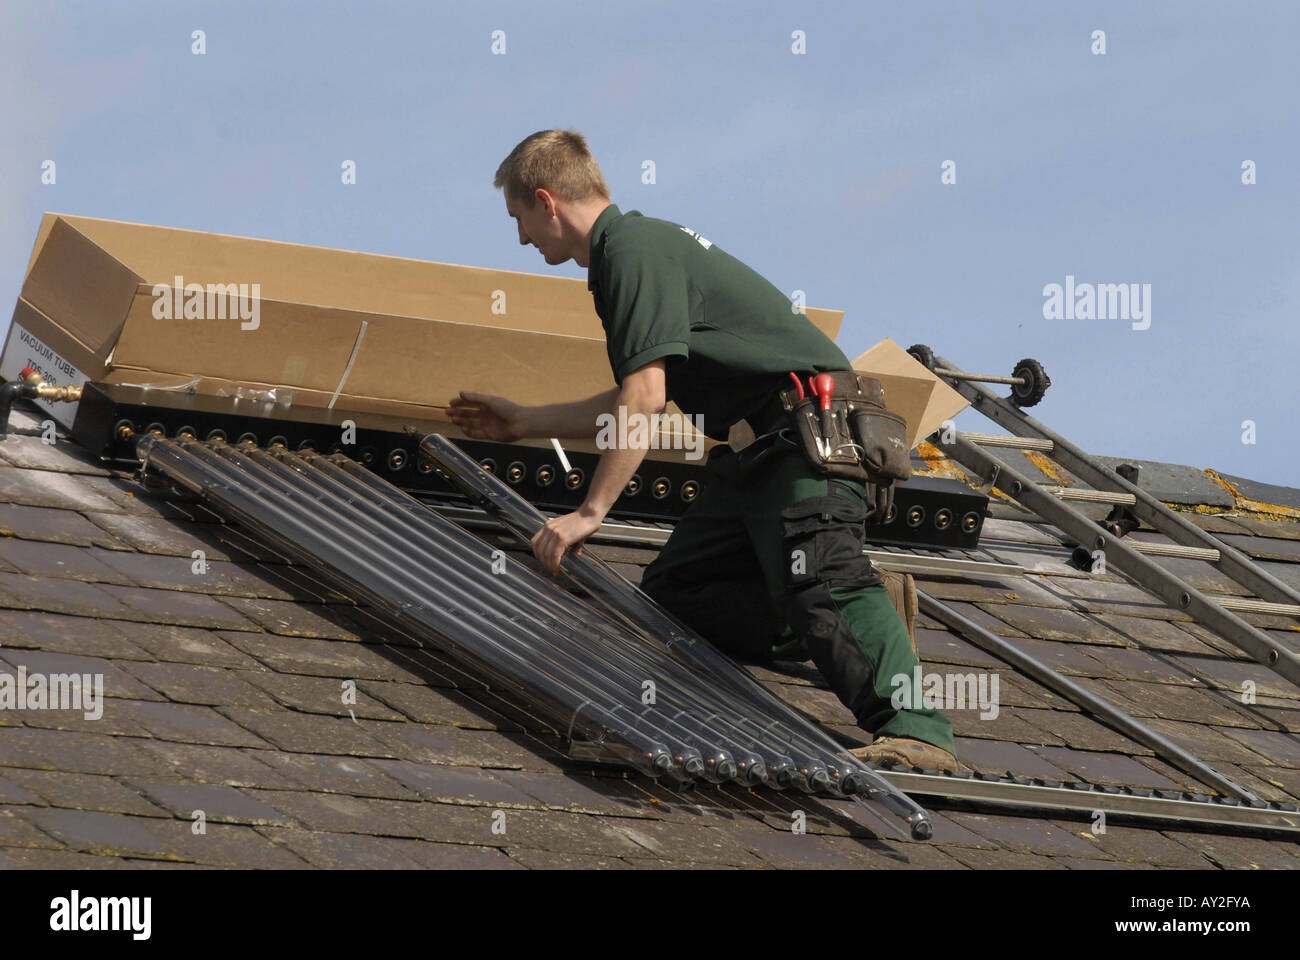 Solar Water Heating Solar Water Heating system being installed on the roof of a house in Southern England Stock Photo